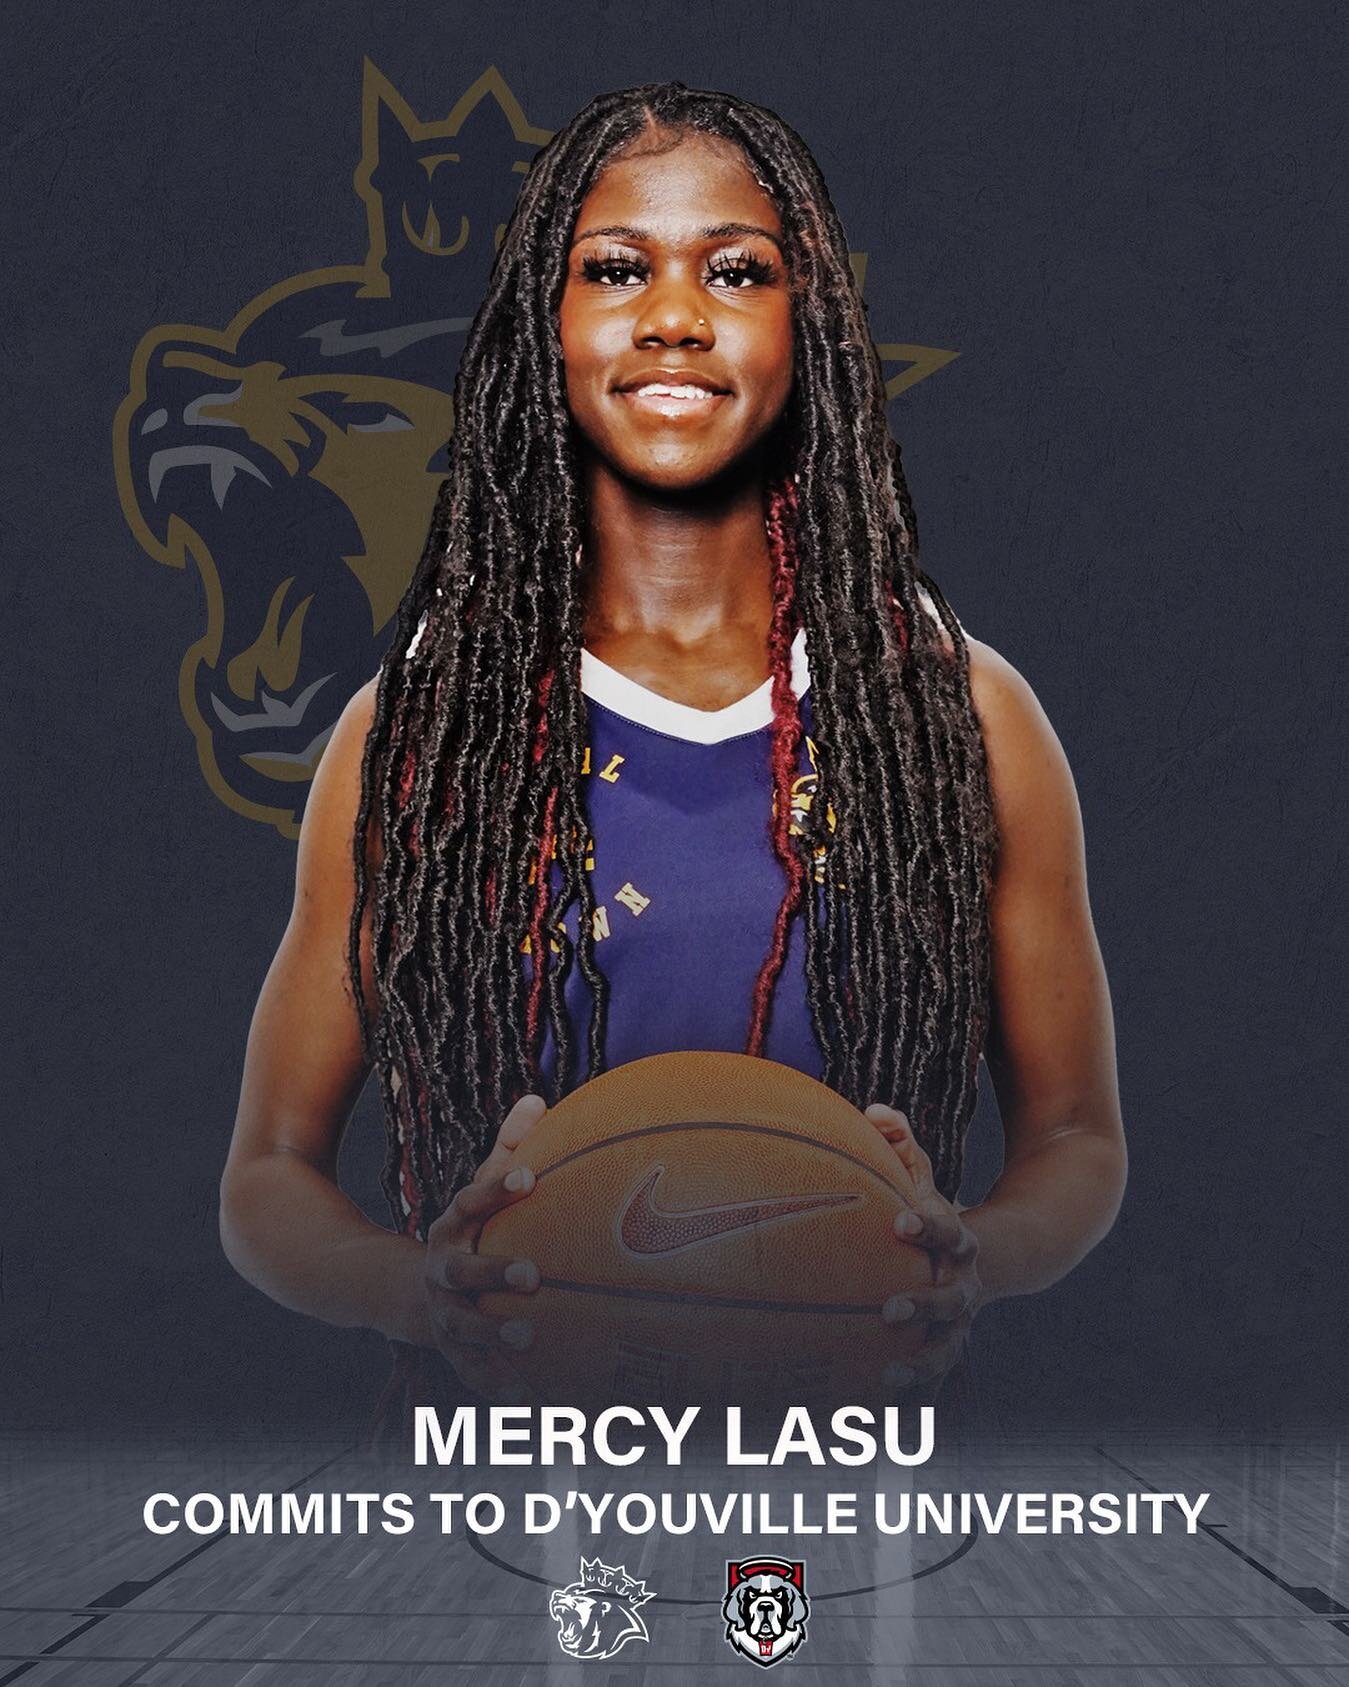 Proud to announce @mercy.lasu has committed to @dyouville_u Buffalo, NY

#defendthecrown